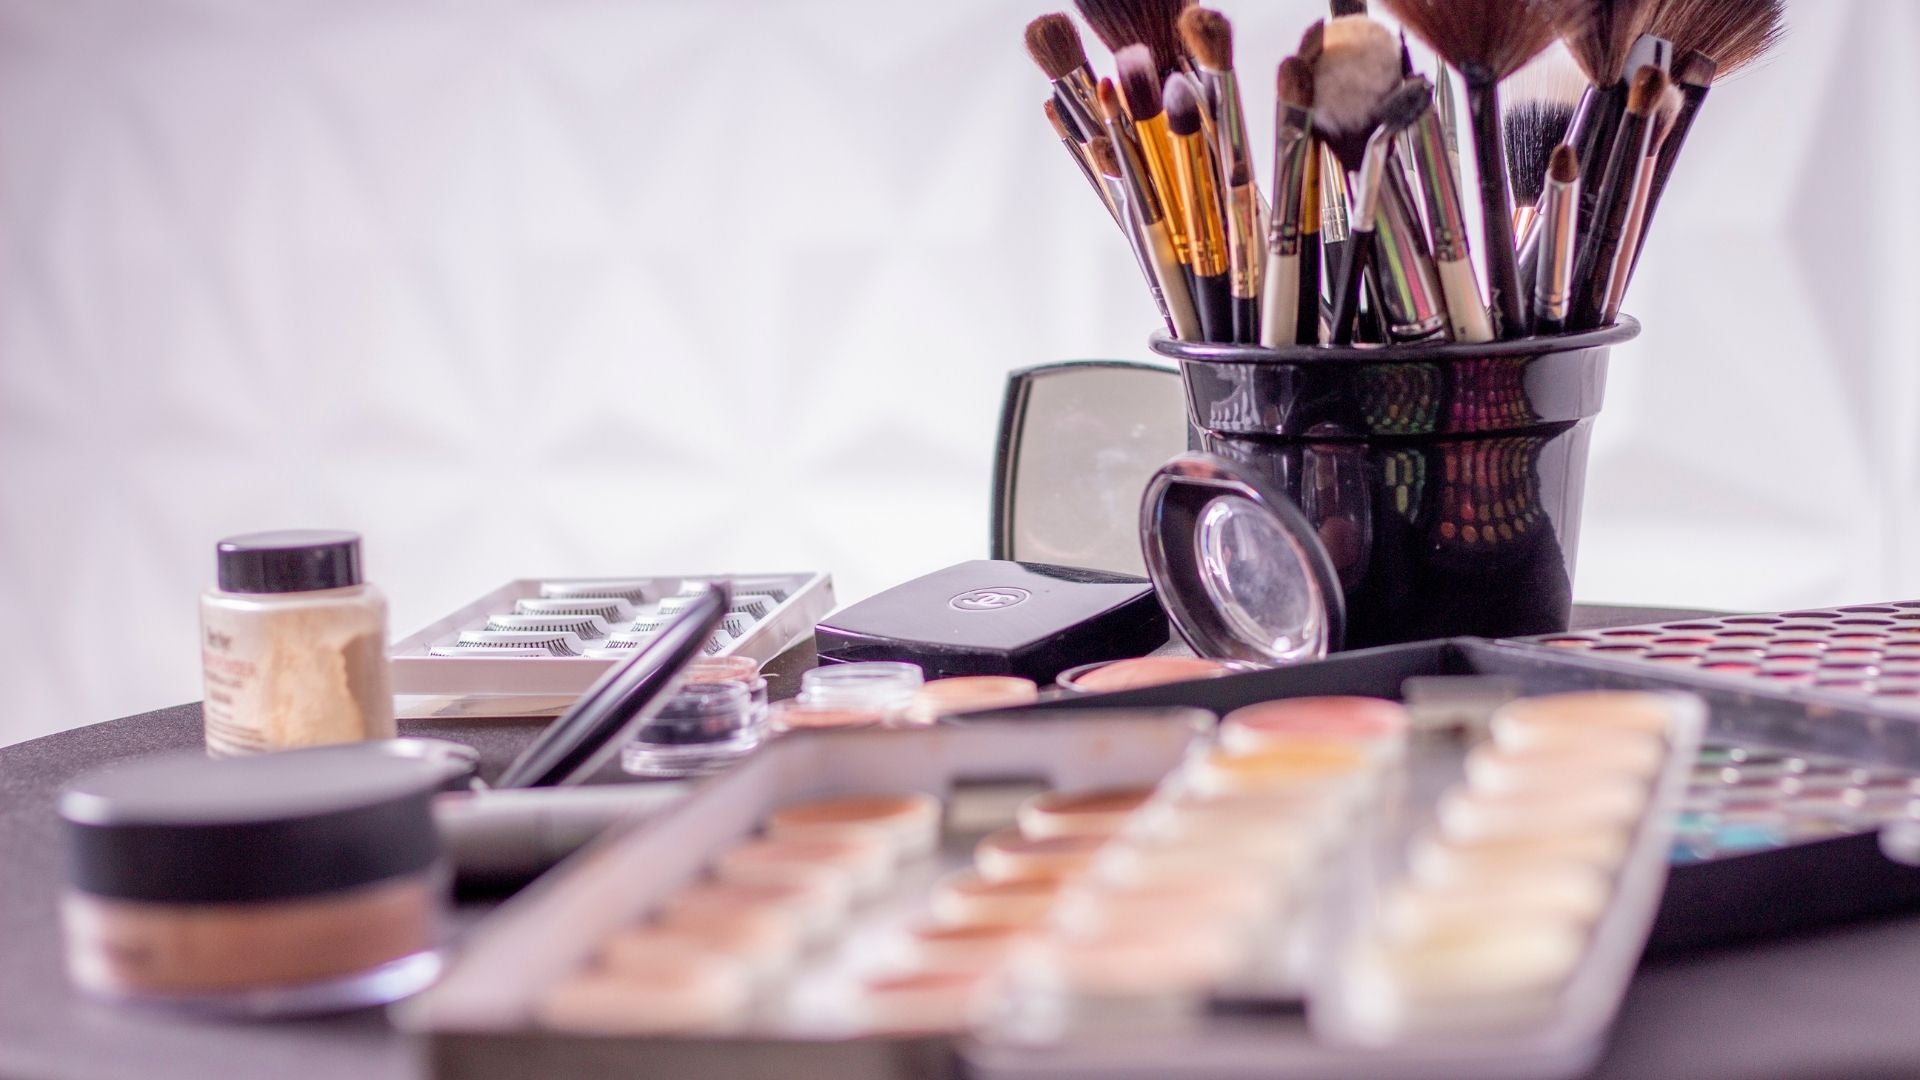 7 Essential Things To Do Before Applying Makeup